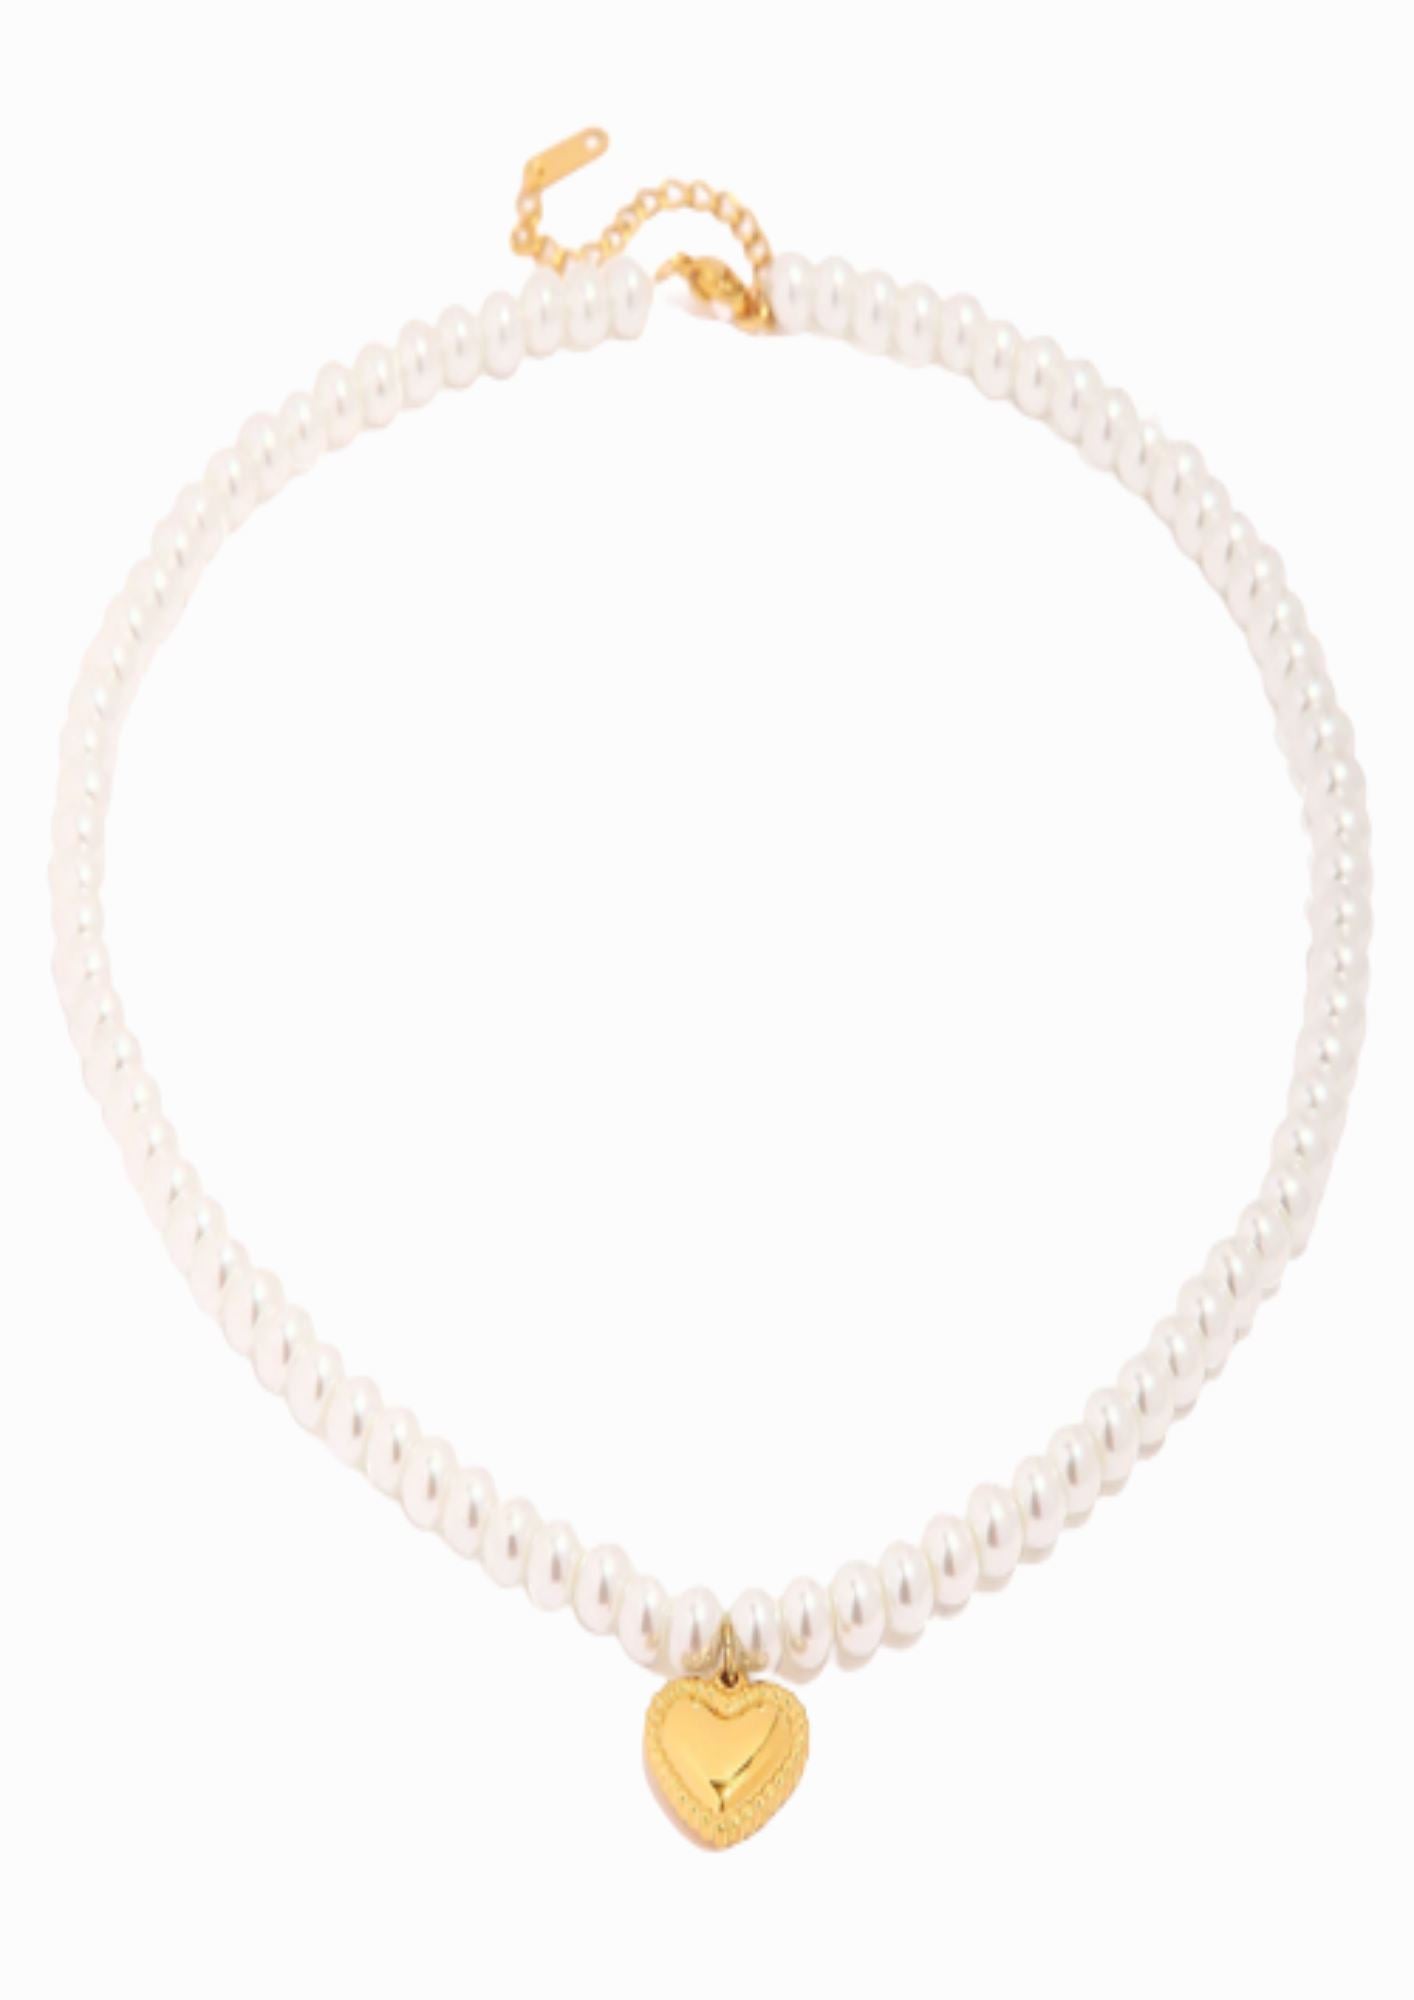 LOVE PEARL NECKLACE neck Yubama Jewelry Online Store - The Elegant Designs of Gold and Silver ! 